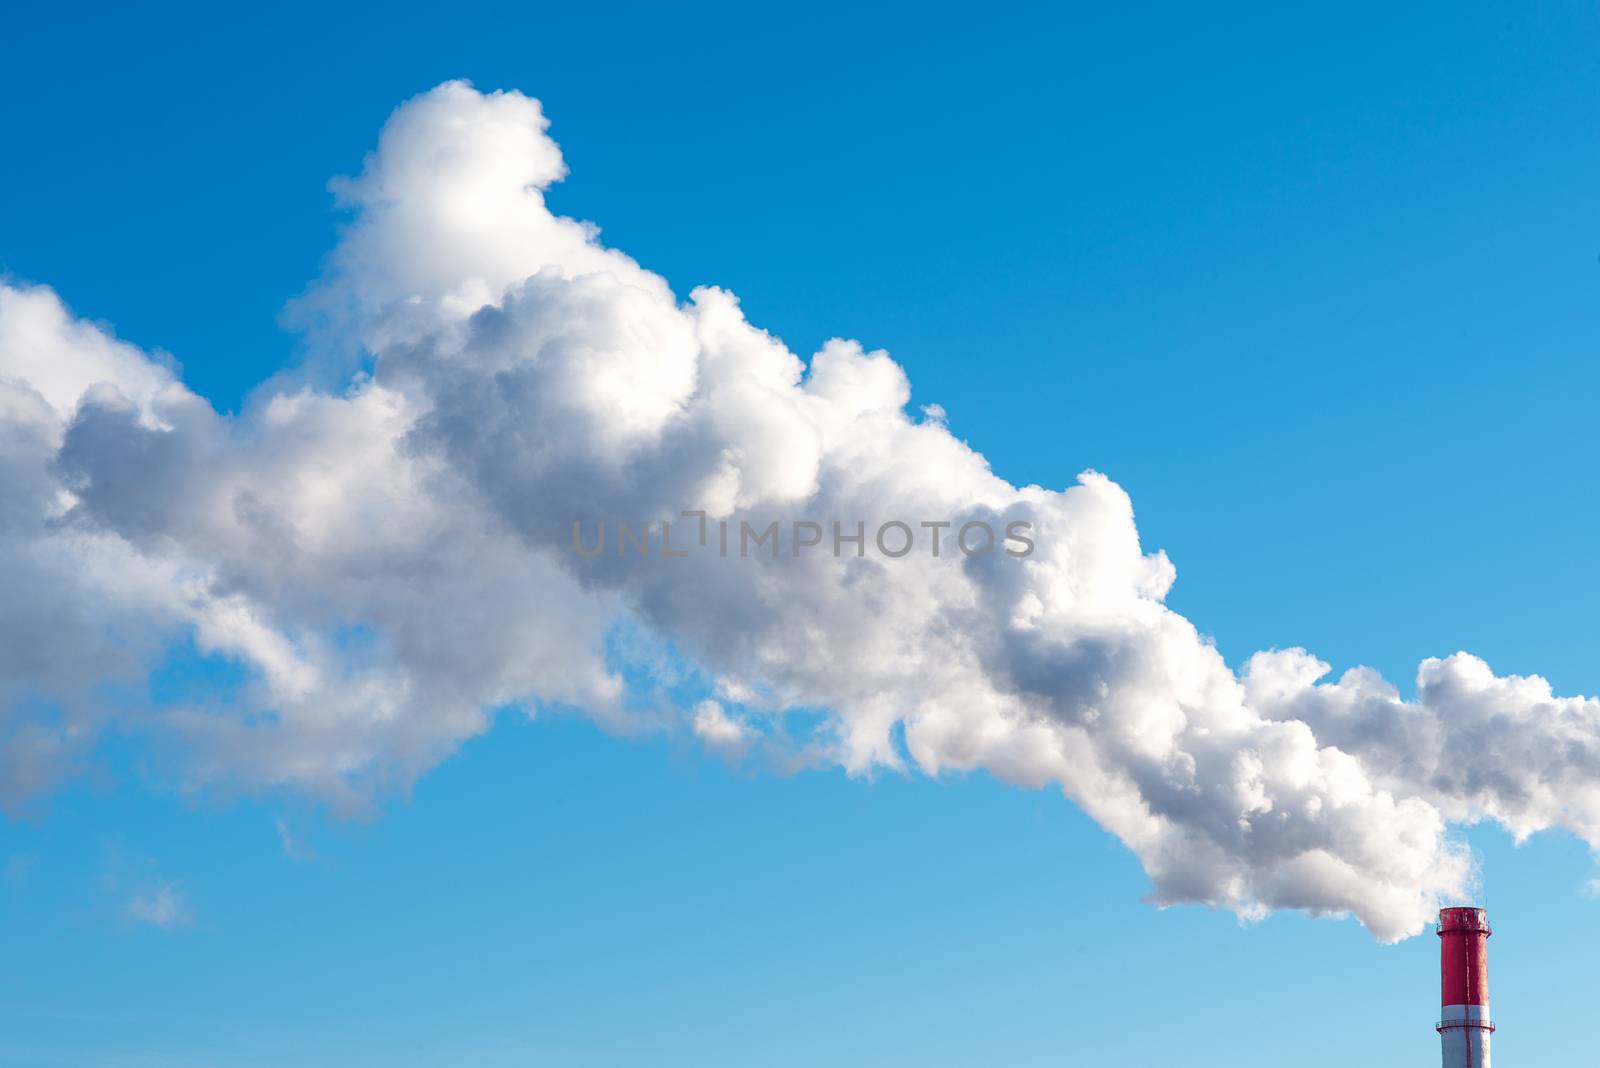  Atomic Power Station with blue sky and clouds